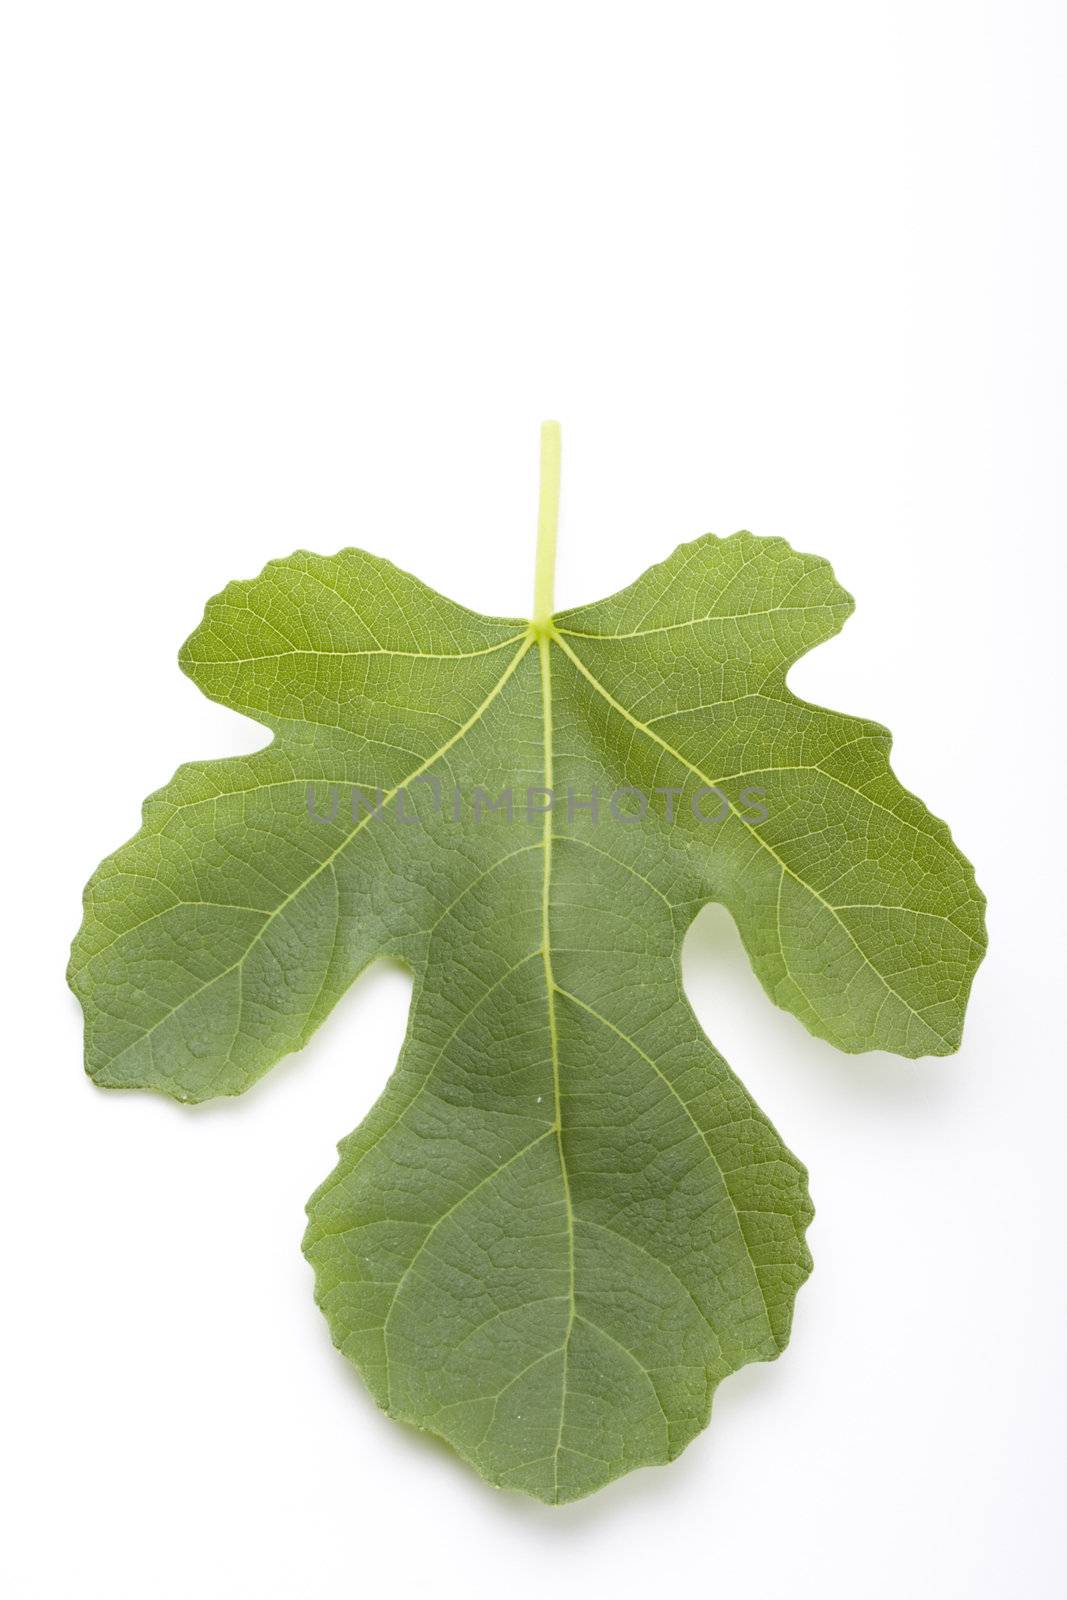 fig leaf on white background by bernjuer